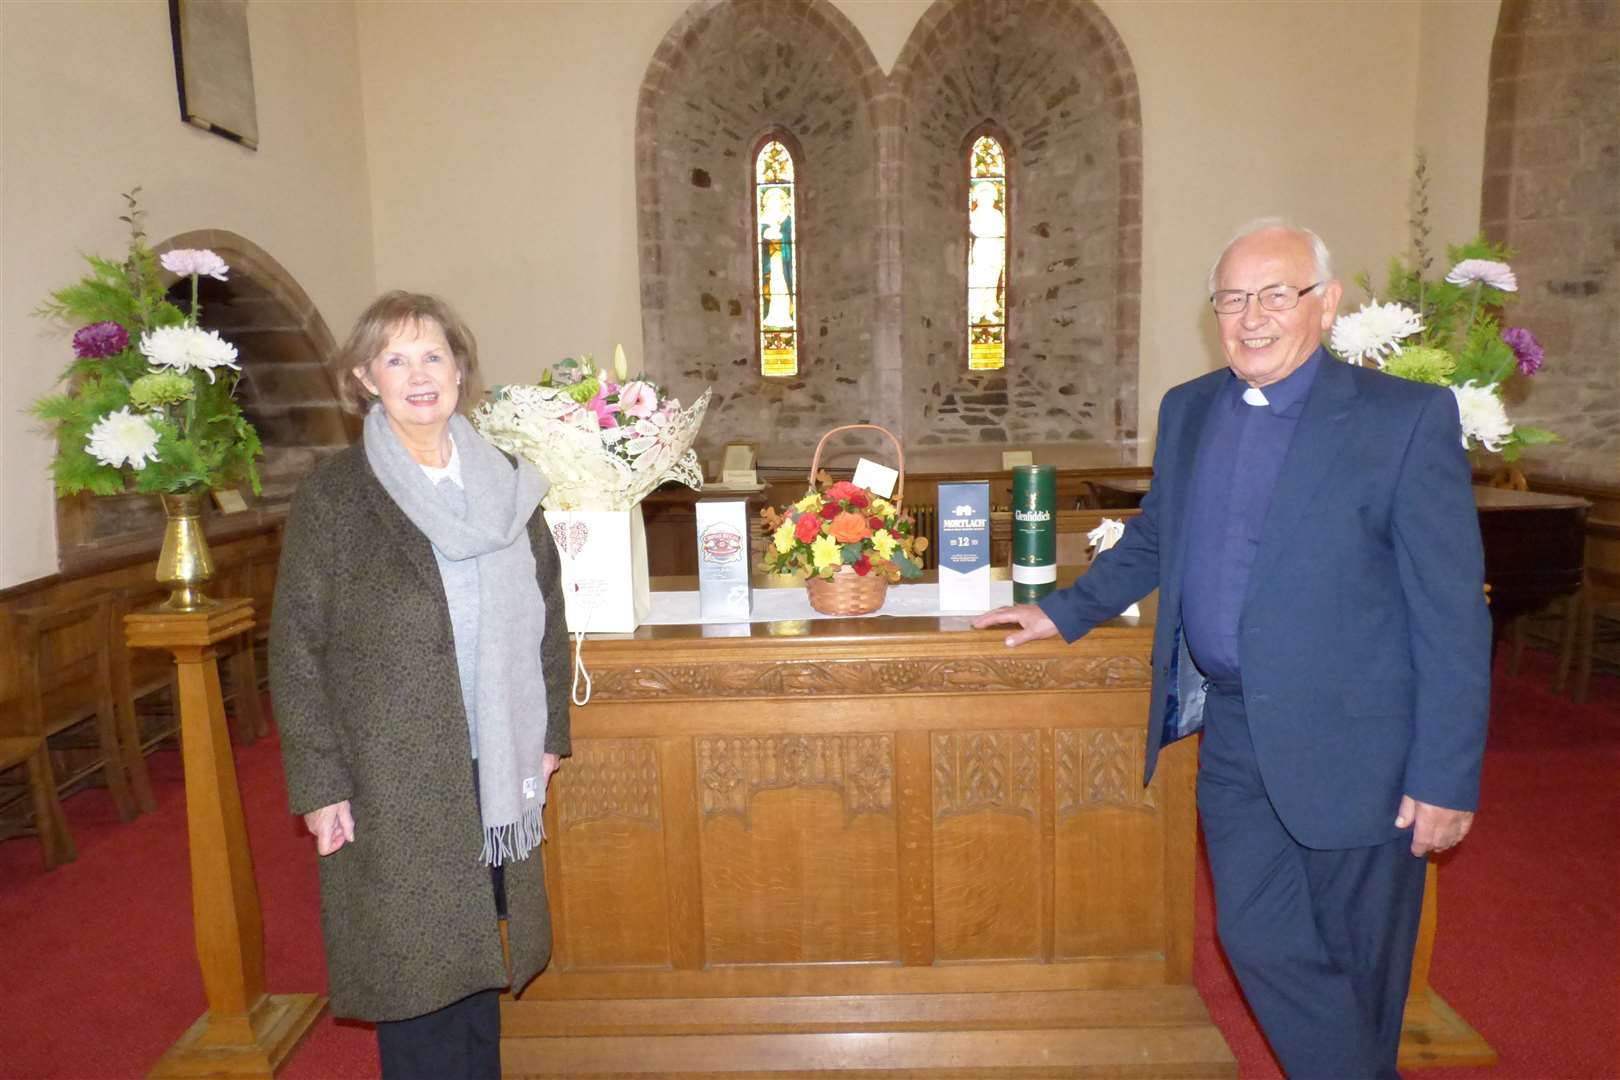 The Mortlach and Cabrach Parish Church thanked interim moderator the Rev George Rollo and wife Ruth.